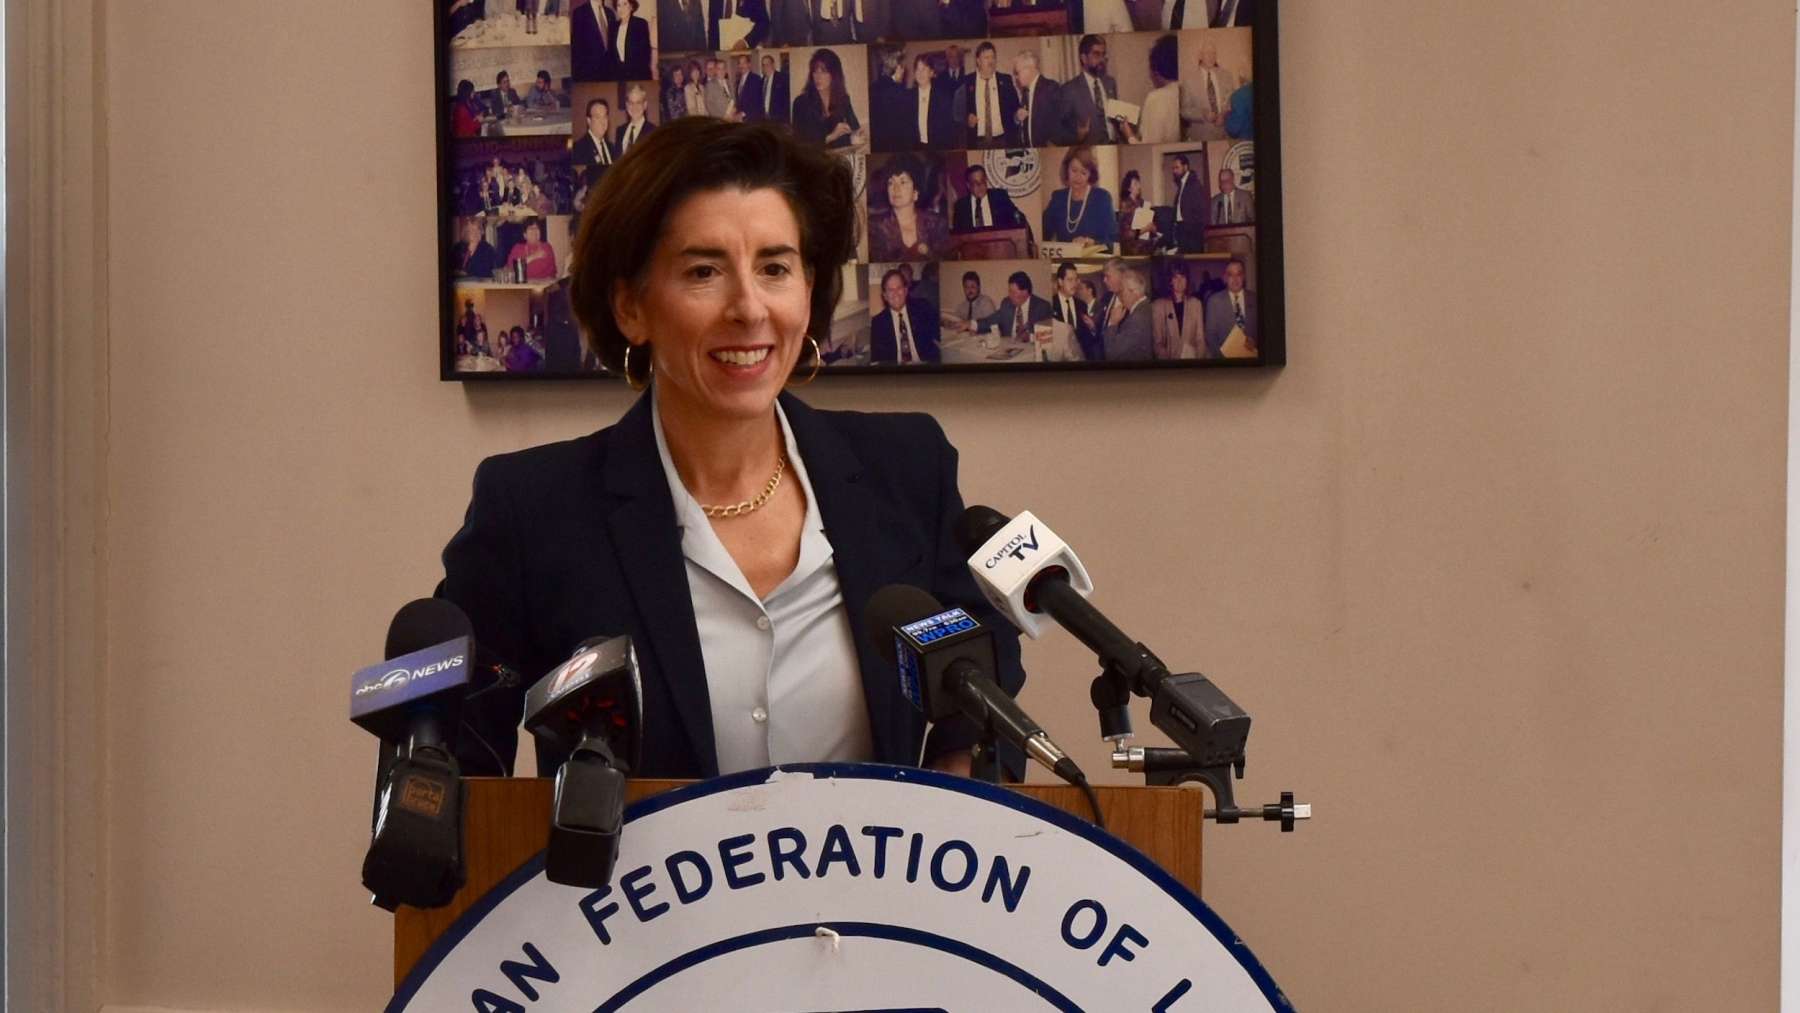 Rhode Island News: Democratic governors form working group on reopening economy post COVID-19